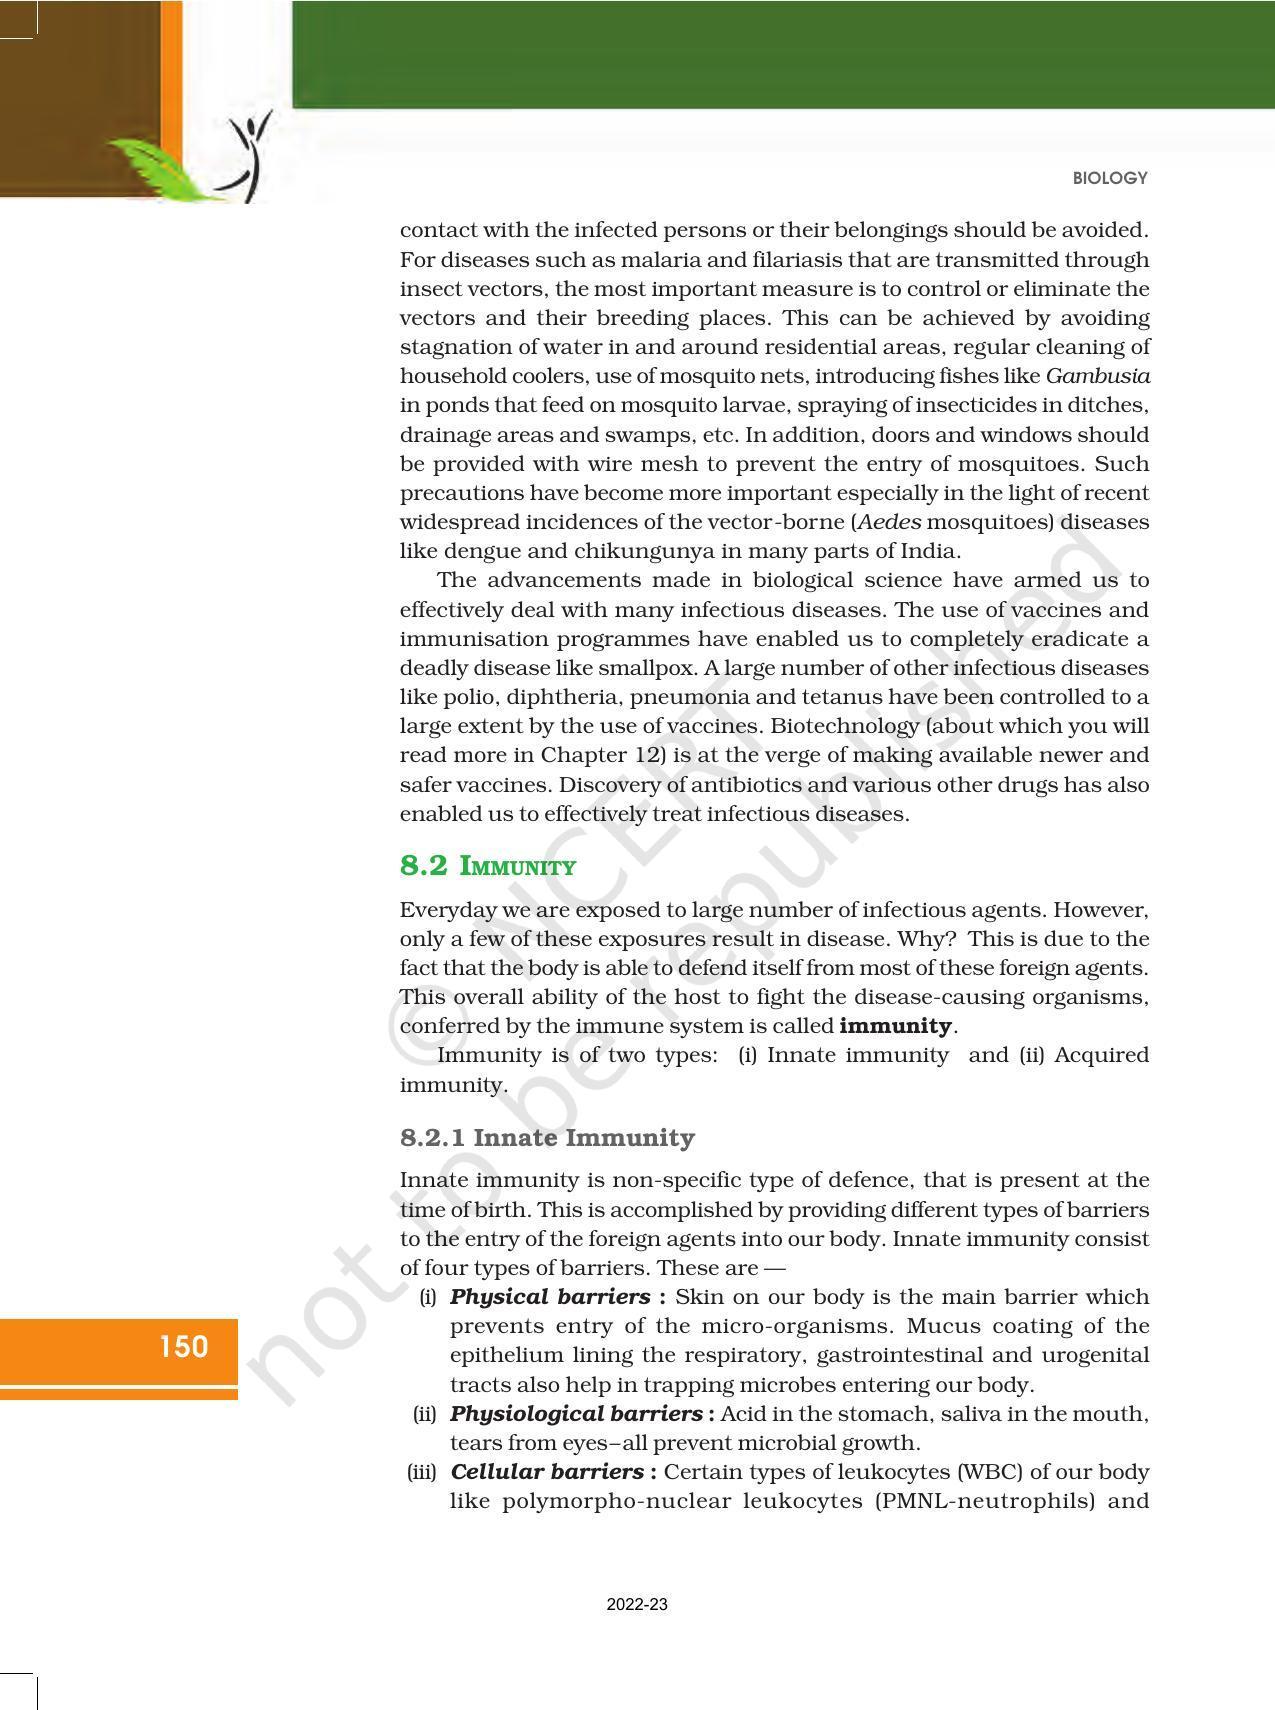 NCERT Book for Class 12 Biology Chapter 8 Human Health and Disease - Page 8